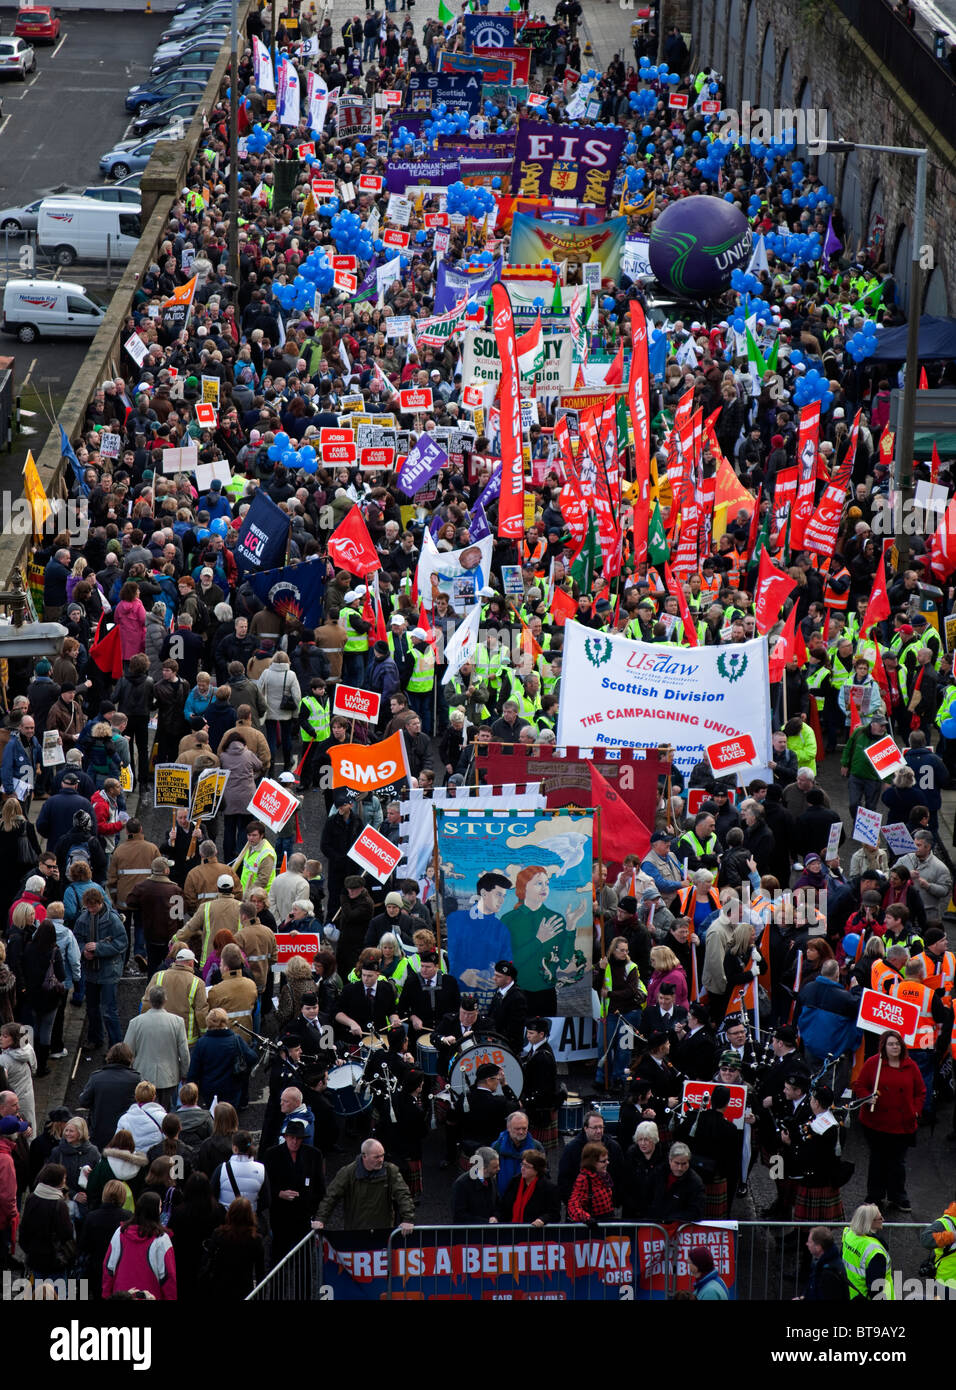 23rd October ‘There is a Better Way’ march and rally in Edinburgh, Scotland, UK, Europe Stock Photo